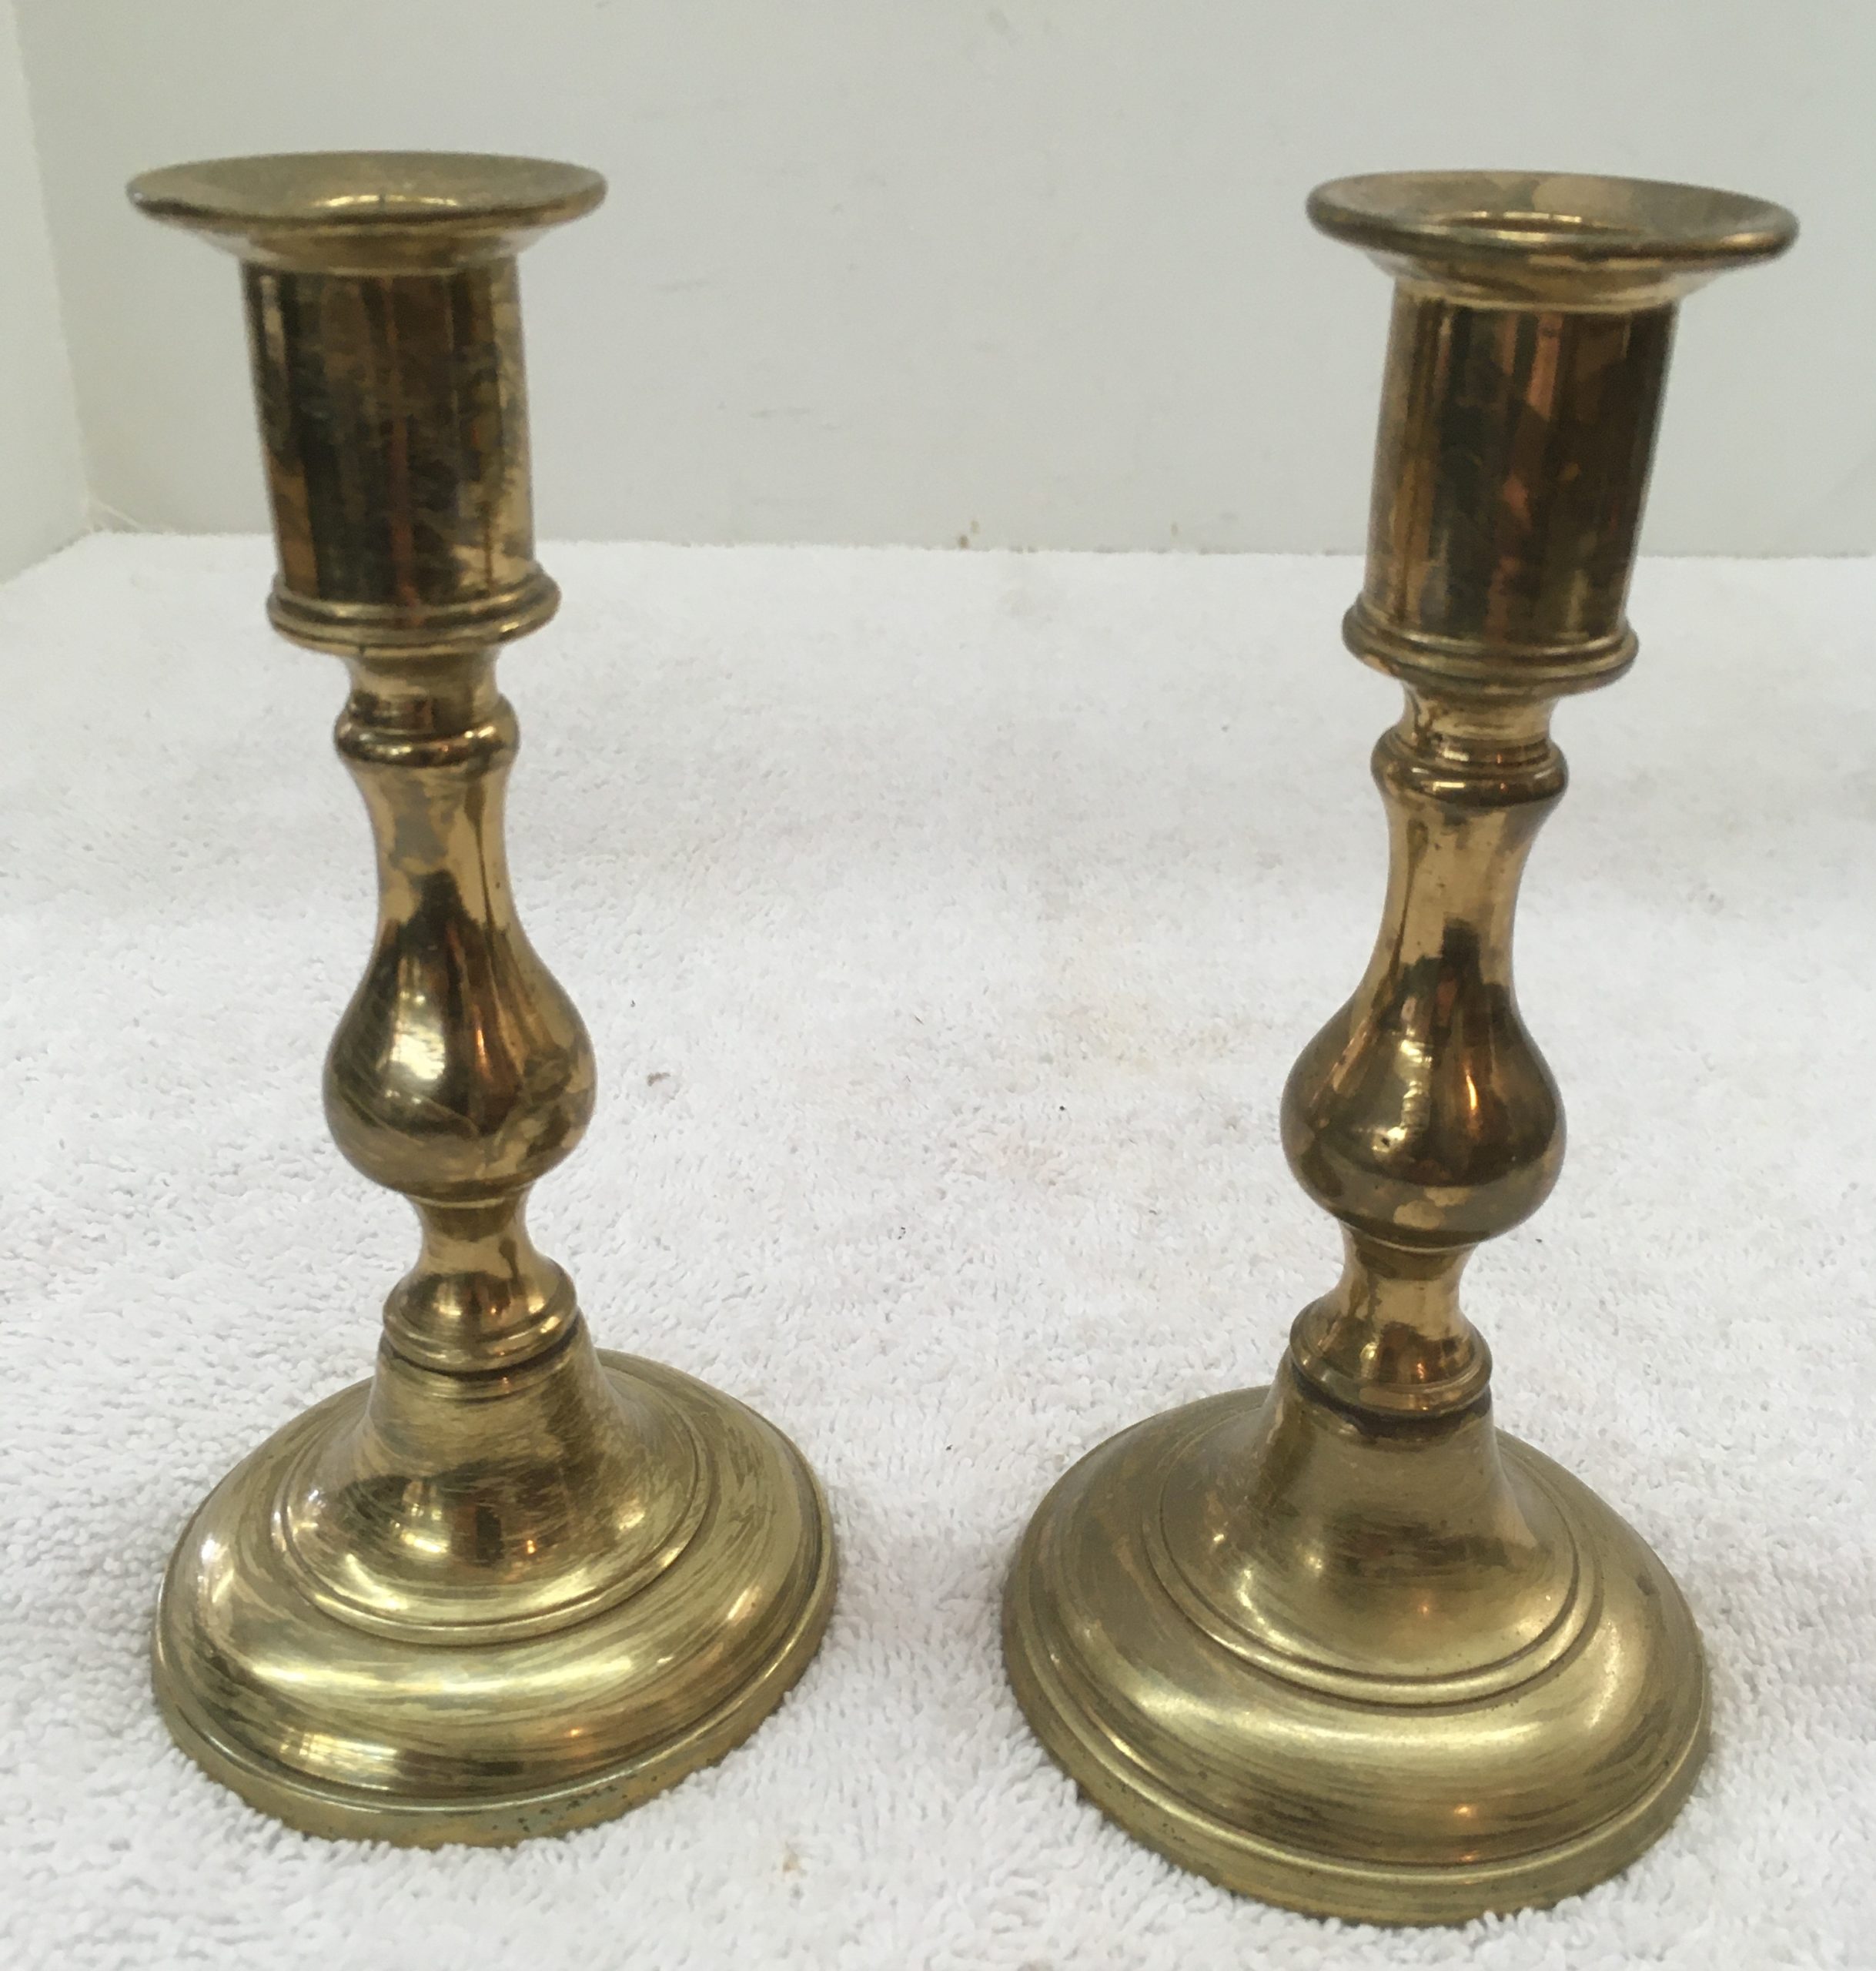 SP 080220 PP 008 2 Brass Candlesticks 12 1 Scaled 